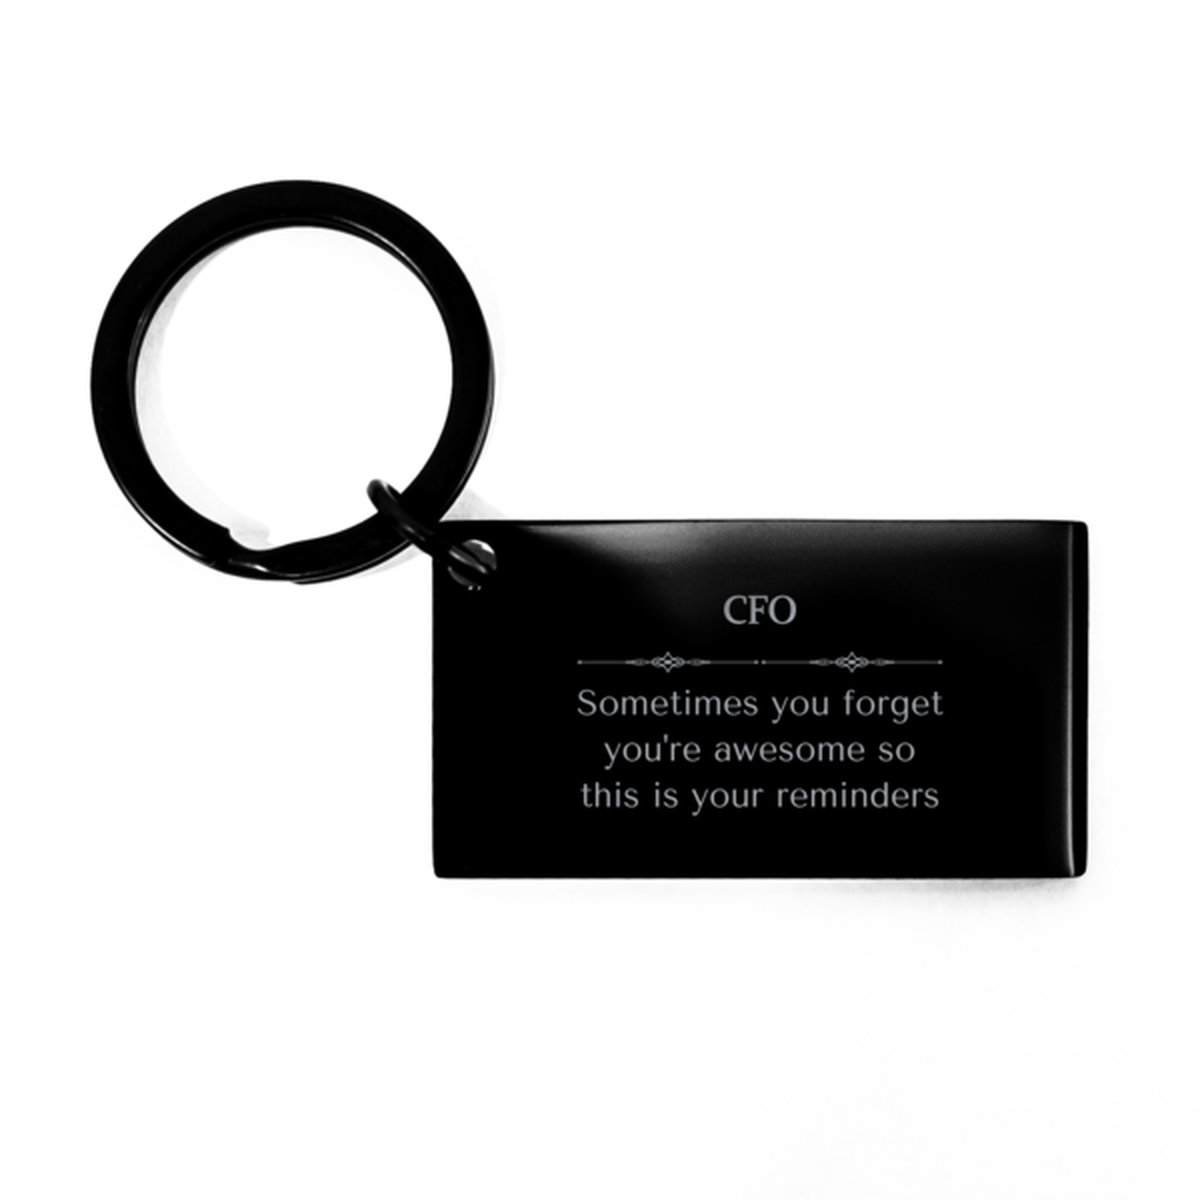 Sentimental CFO Keychain, Designer Sometimes you forget you're awesome so this is your reminders, Graduation Christmas Birthday Gifts for CFO, Men, Women, Coworkers